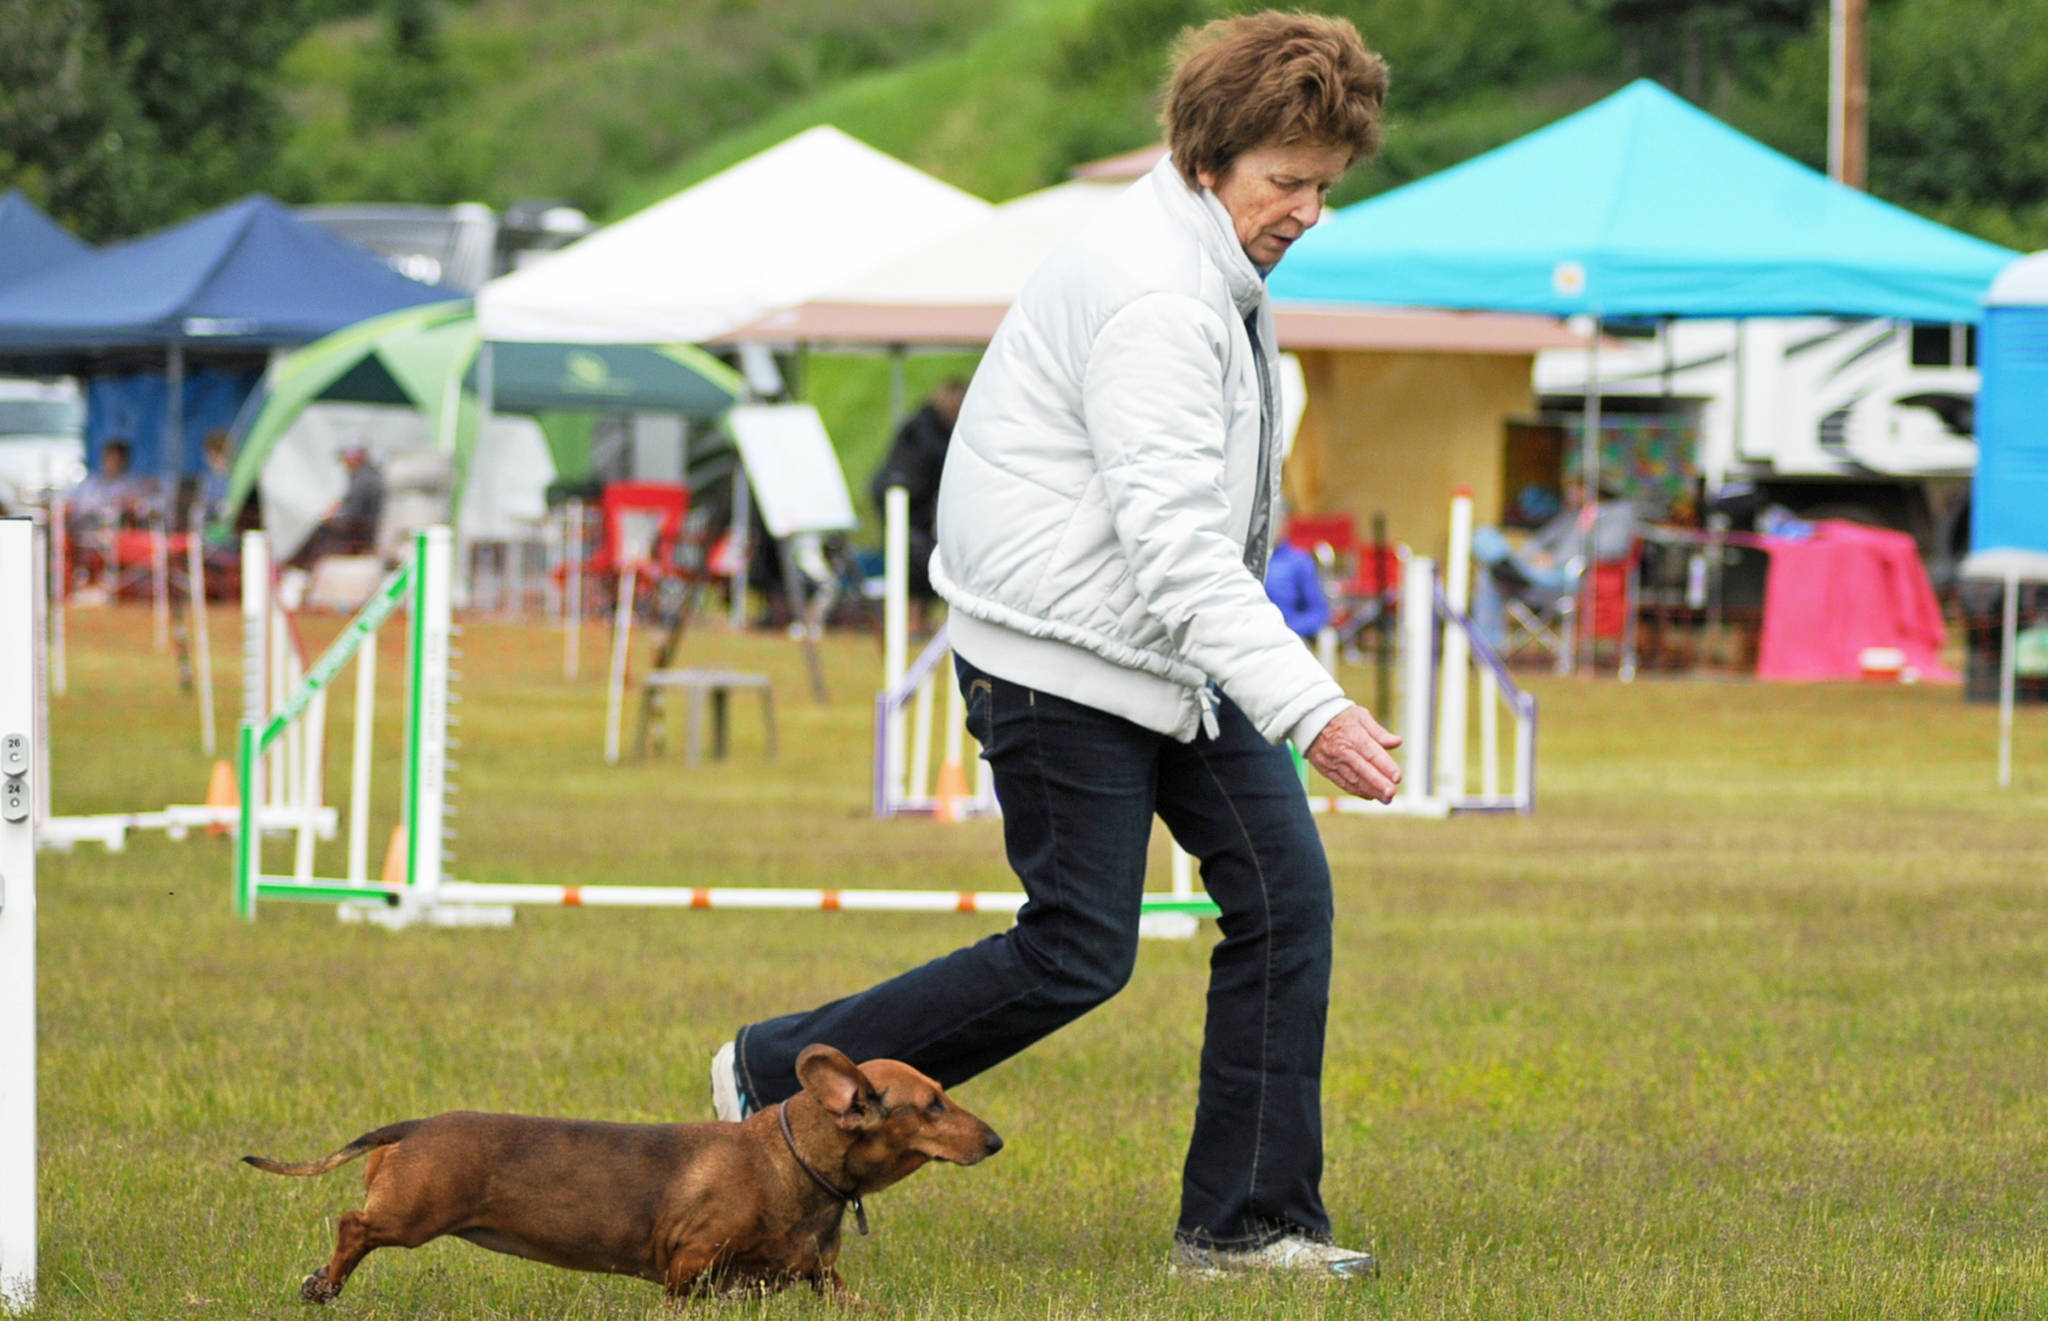 A trainer directs her dog through the agility course at the Kenai Kennel Club’s annual dog show, obedience and agility trials on Saturday, July 14, 2018 in Soldotna, Alaska. Dog owners come from all over the state to take part in the events each year. (Photo by Elizabeth Earl/Peninsula Clarion)